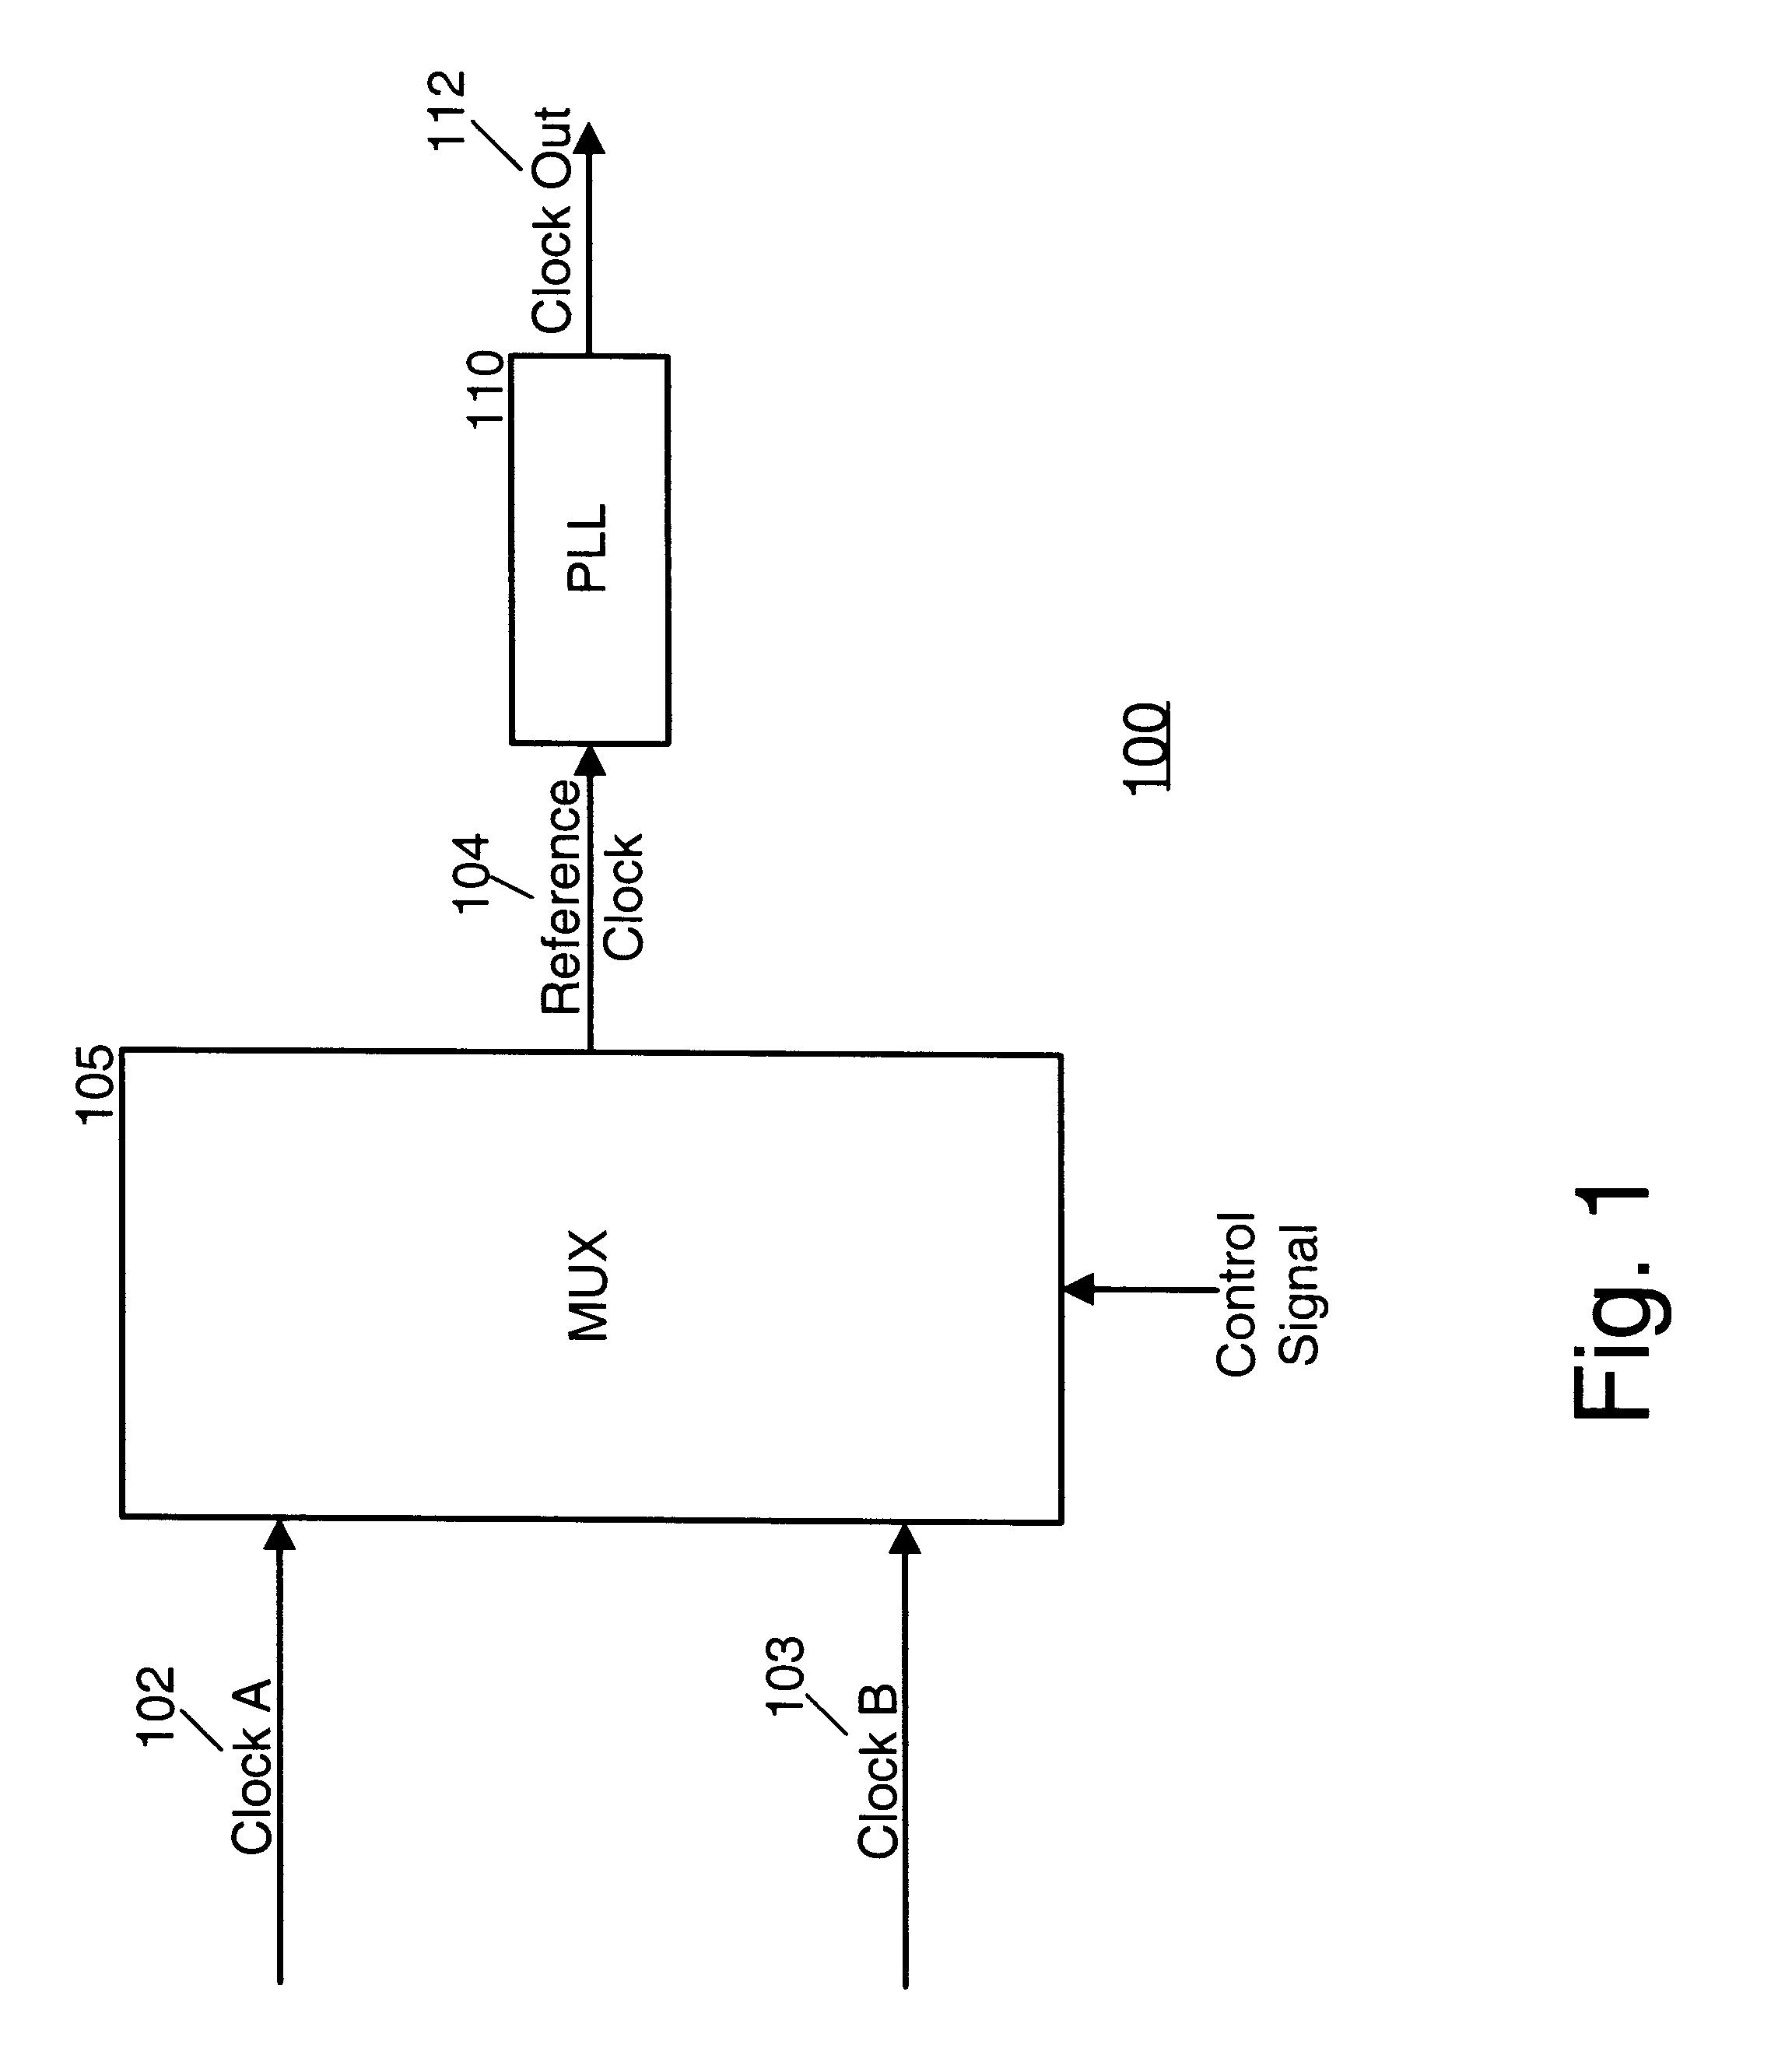 Multi-loop phase lock loop for controlling jitter in a high frequency redundant system